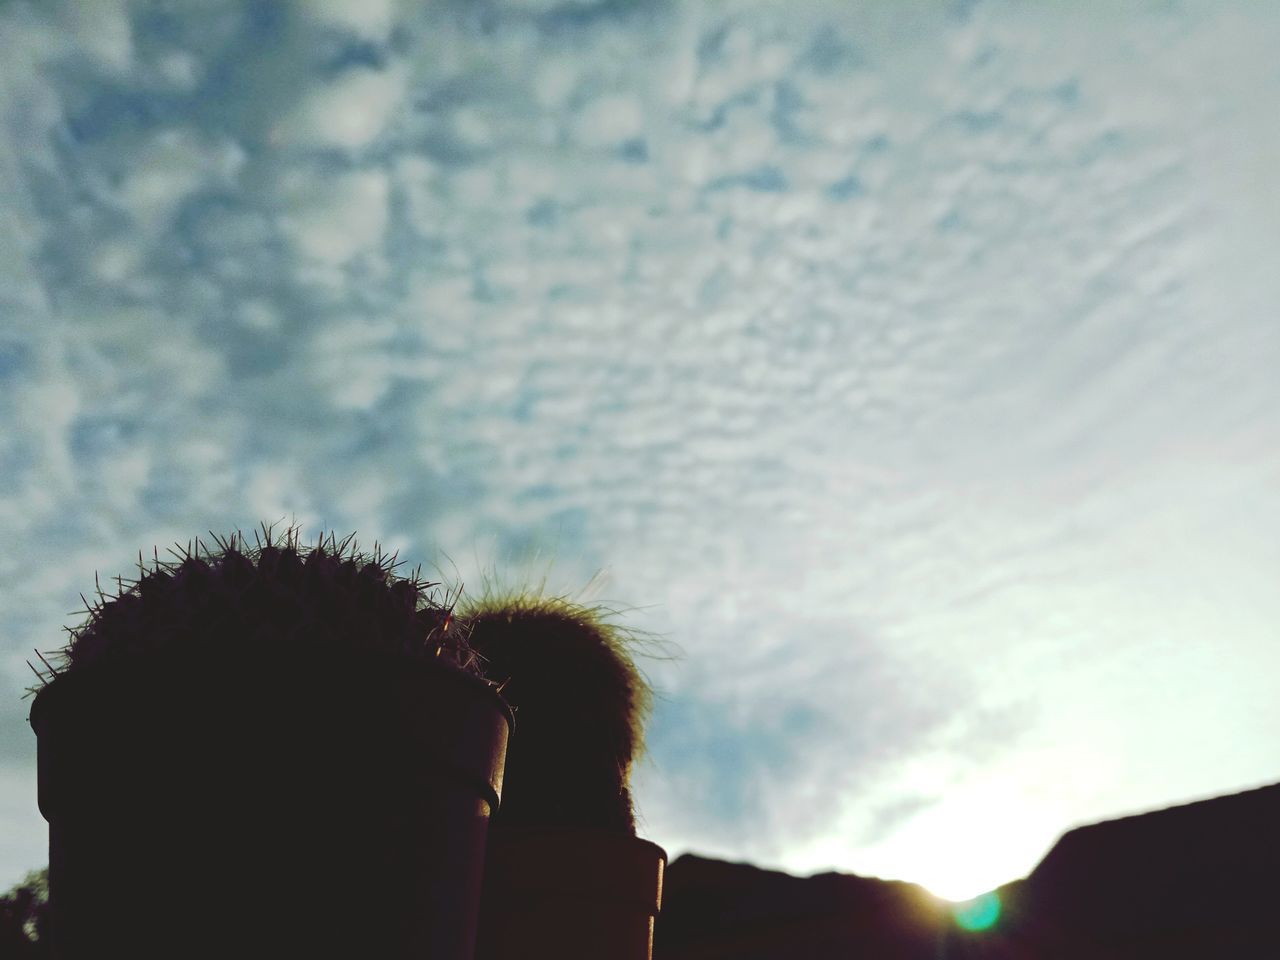 sky, cloud - sky, nature, low angle view, close-up, day, plant, silhouette, real people, outdoors, focus on foreground, beauty in nature, leisure activity, lifestyles, sunlight, growth, sunset